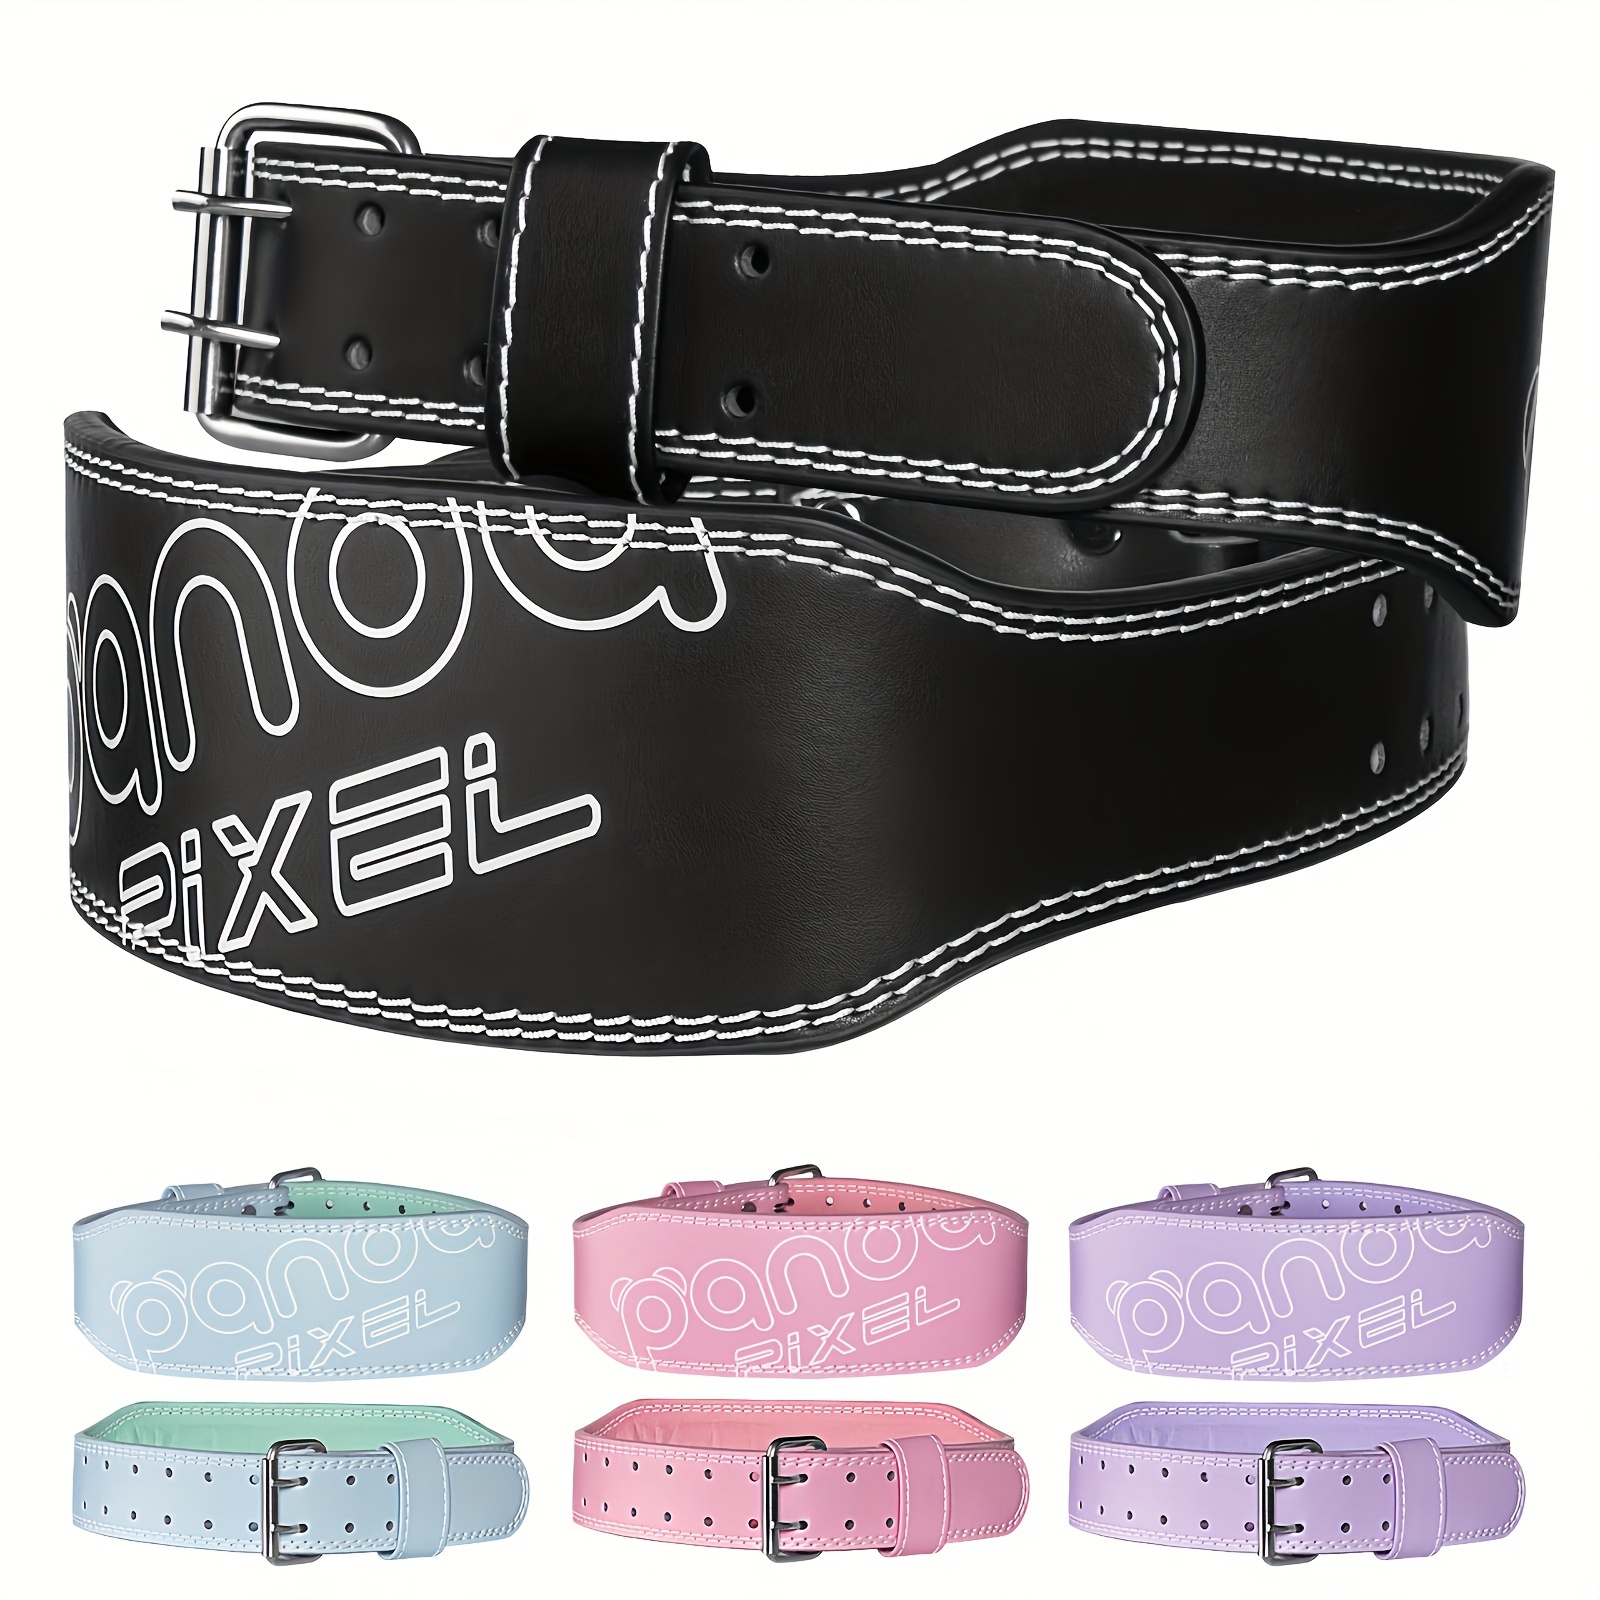 Weight Lifting Belt 5 3 Wide Comfortable Workout Weight Lifting